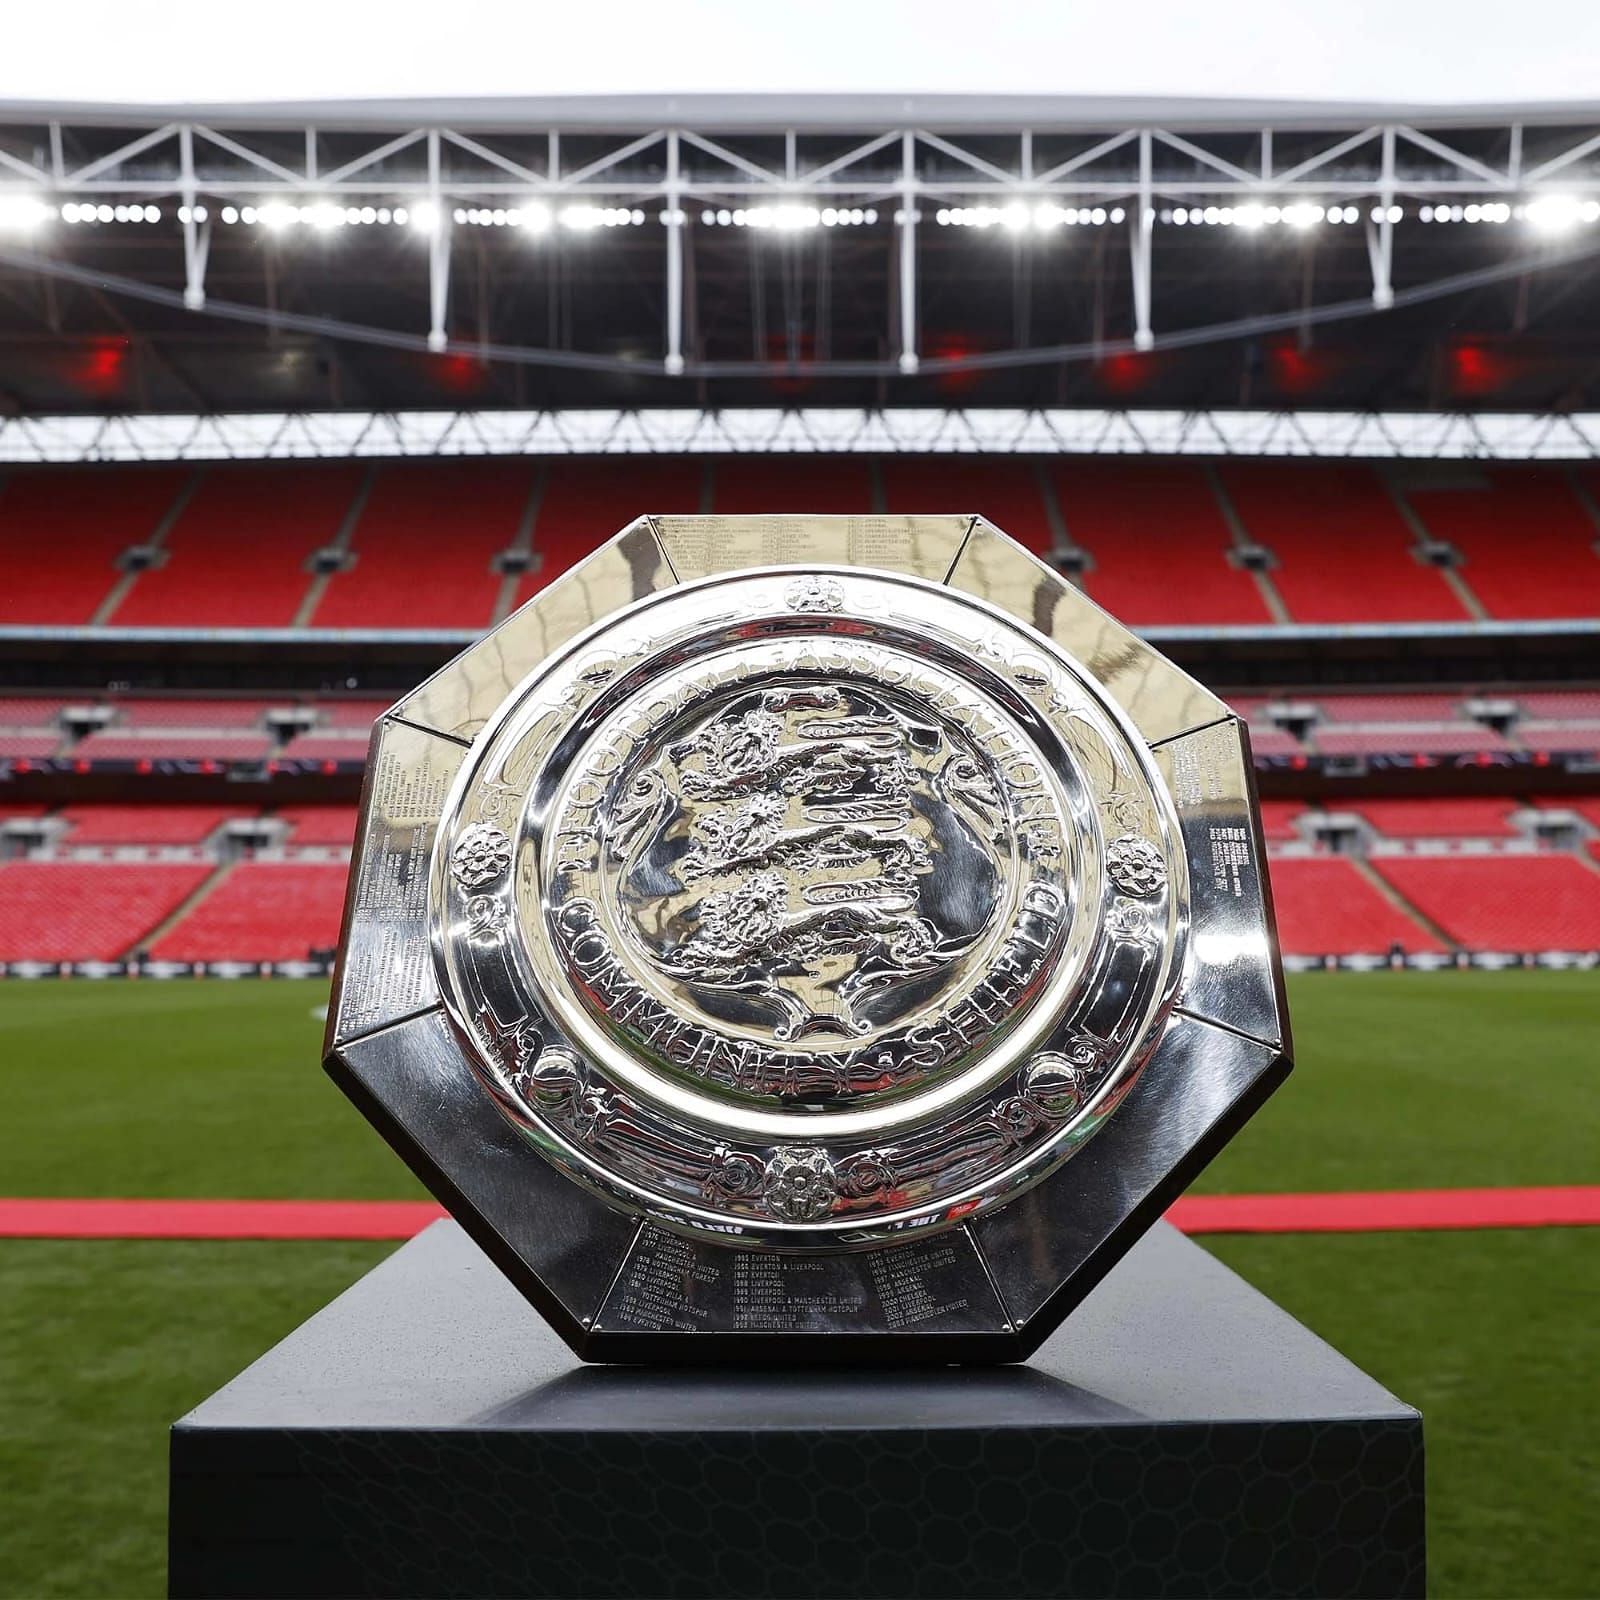 The season gets underway with the FA Community Shield match on Sunday